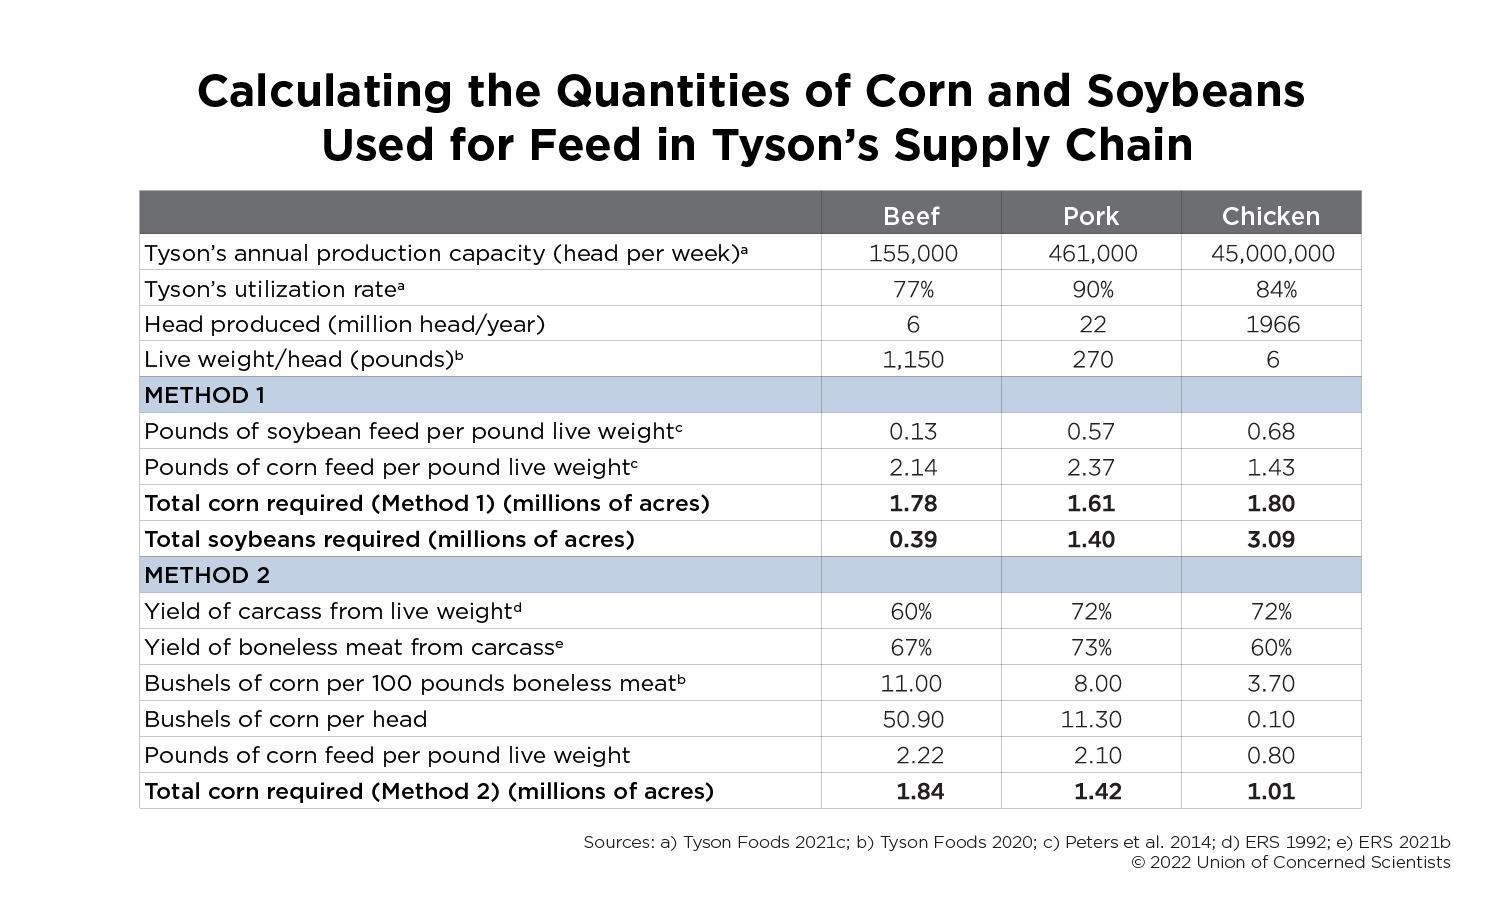 Table showing all the data used to estimate how many acres of corn and soybeans are need to produce the animal feed needed for Tyson products, using two different methods of calculation